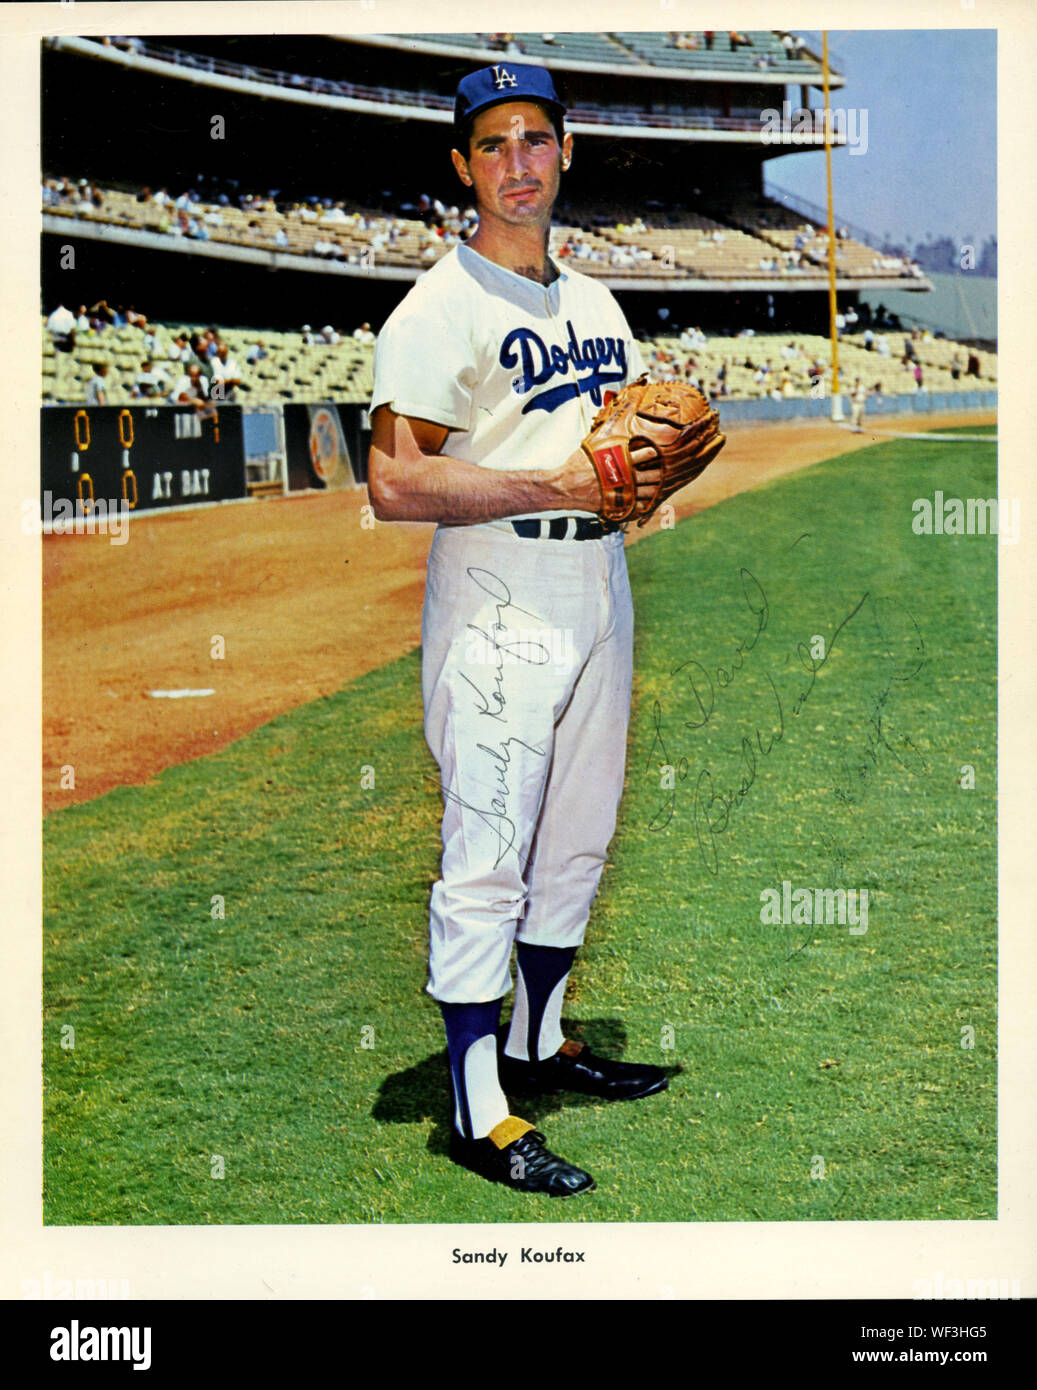 Hall of Fame Pitcher Sandy Koufax with the Los Angeles Dodgers in the 1950s and 60s. Stock Photo